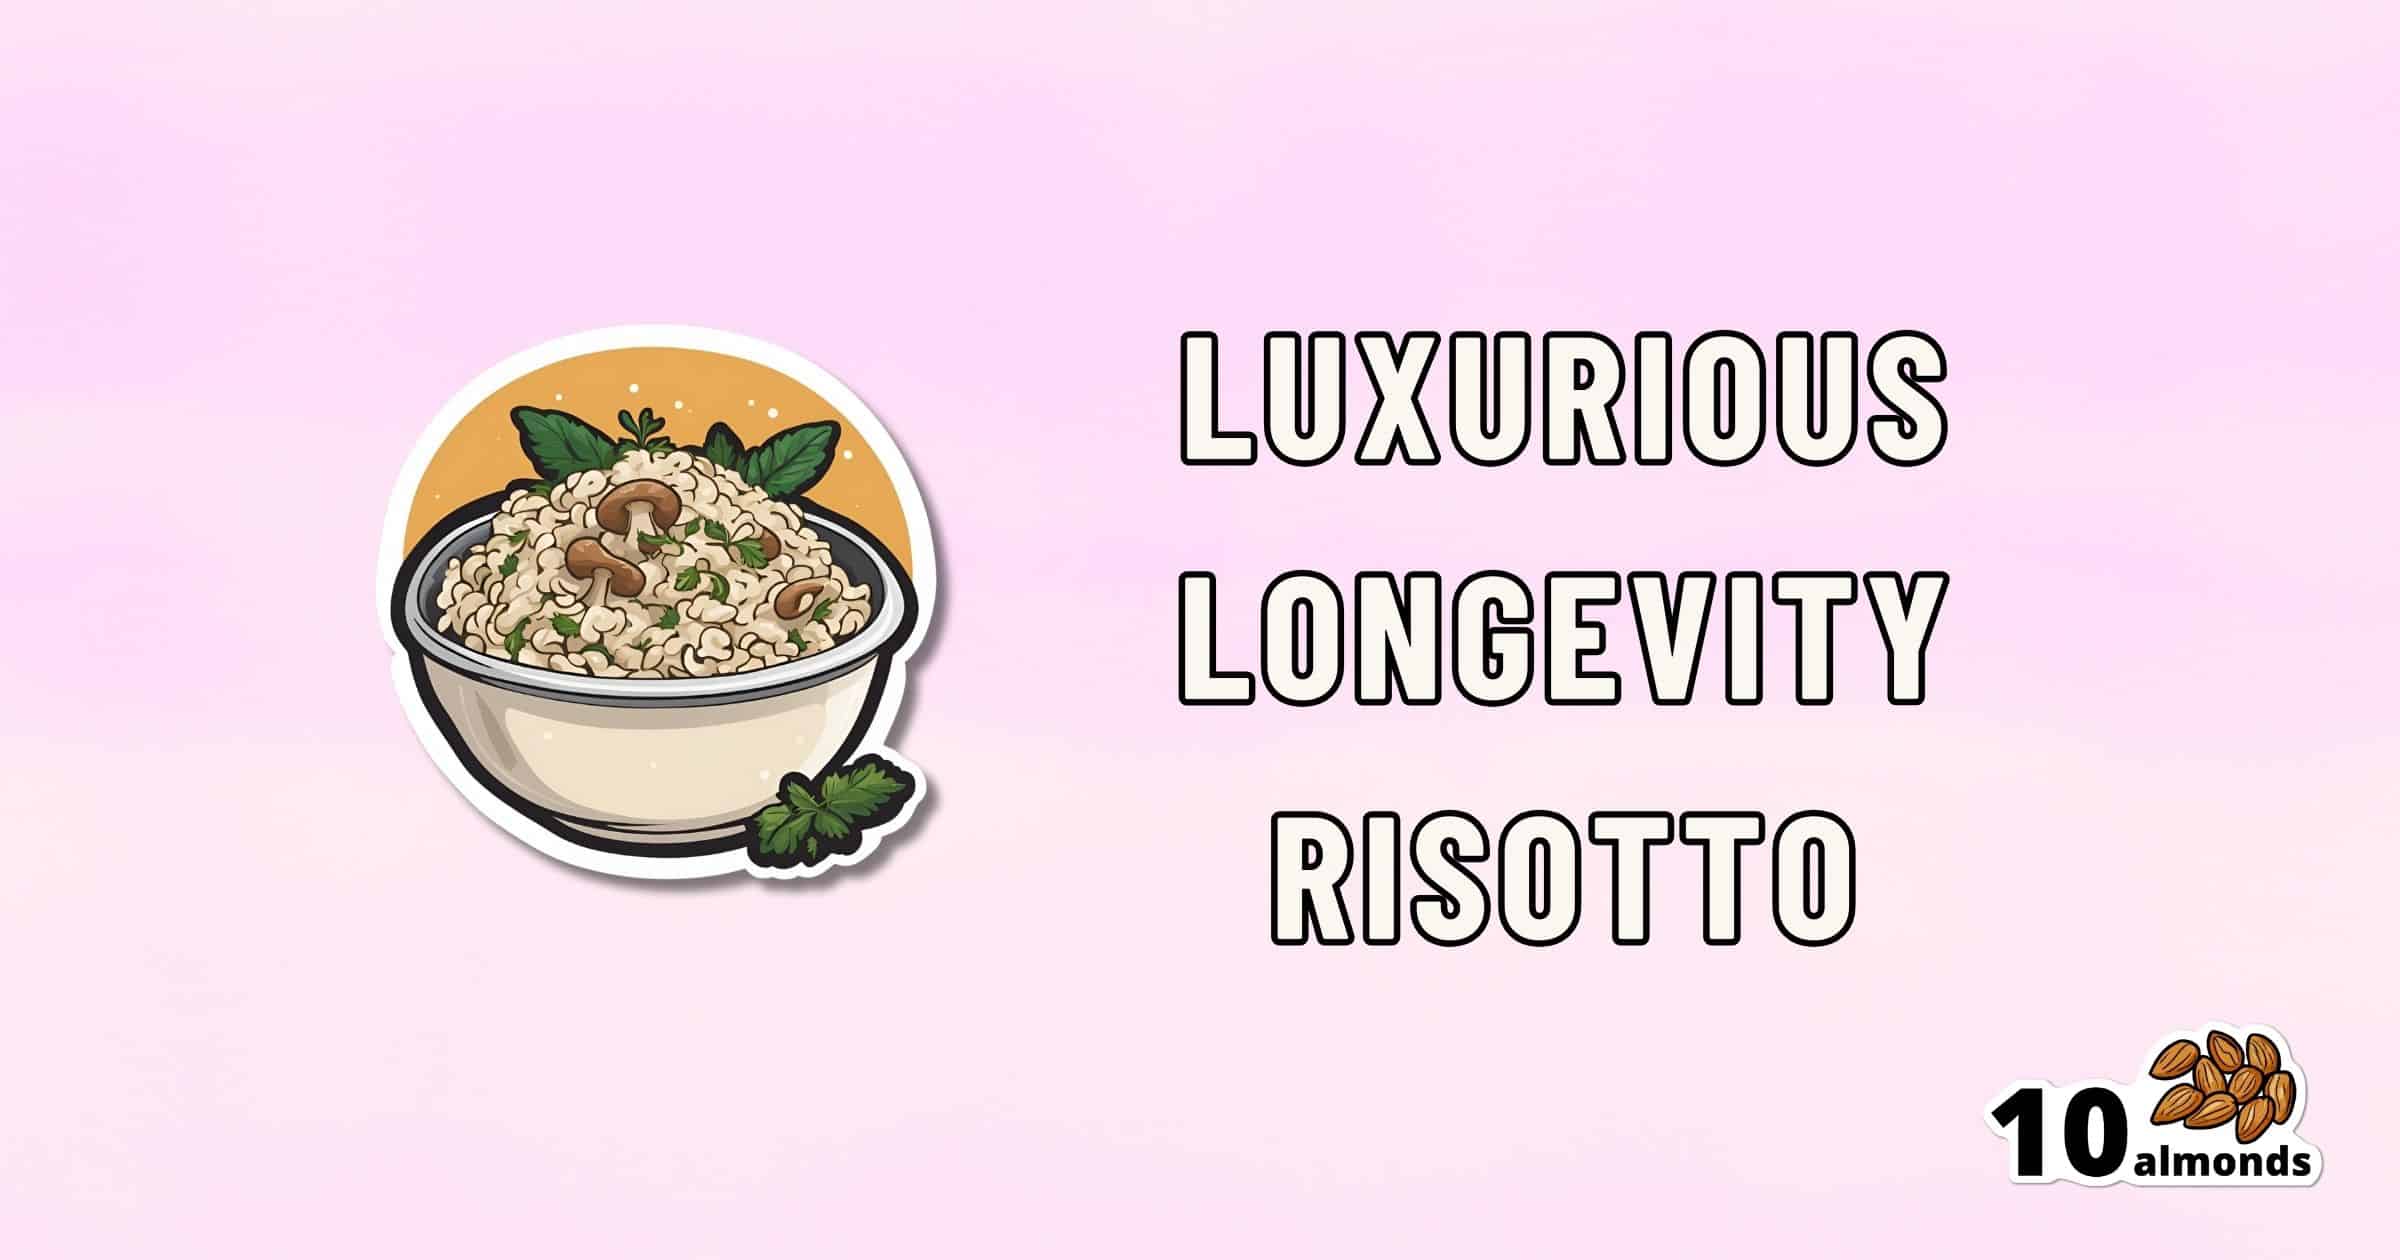 A digital drawing of a bowl of risotto garnished with herbs, set against a pink gradient background. To the right, text reads "Longevity Risotto," exuding luxurious flavor and health benefits, with a "10 almonds" graphic in the bottom right corner.